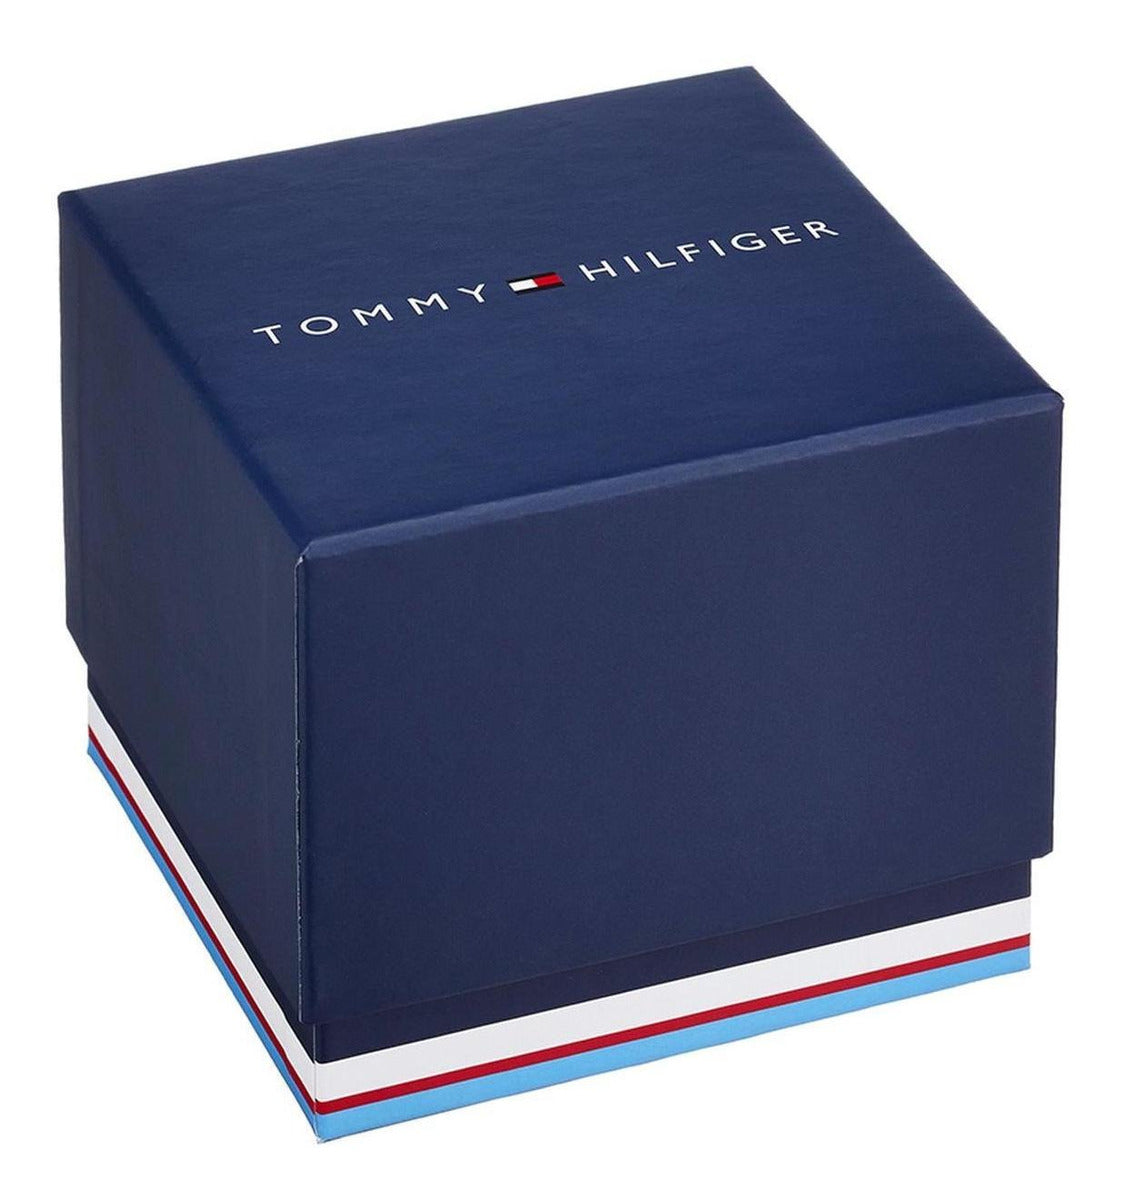 Reloj Tommy Hilfiger Mujer Acero Inoxidable 1782580 Florence